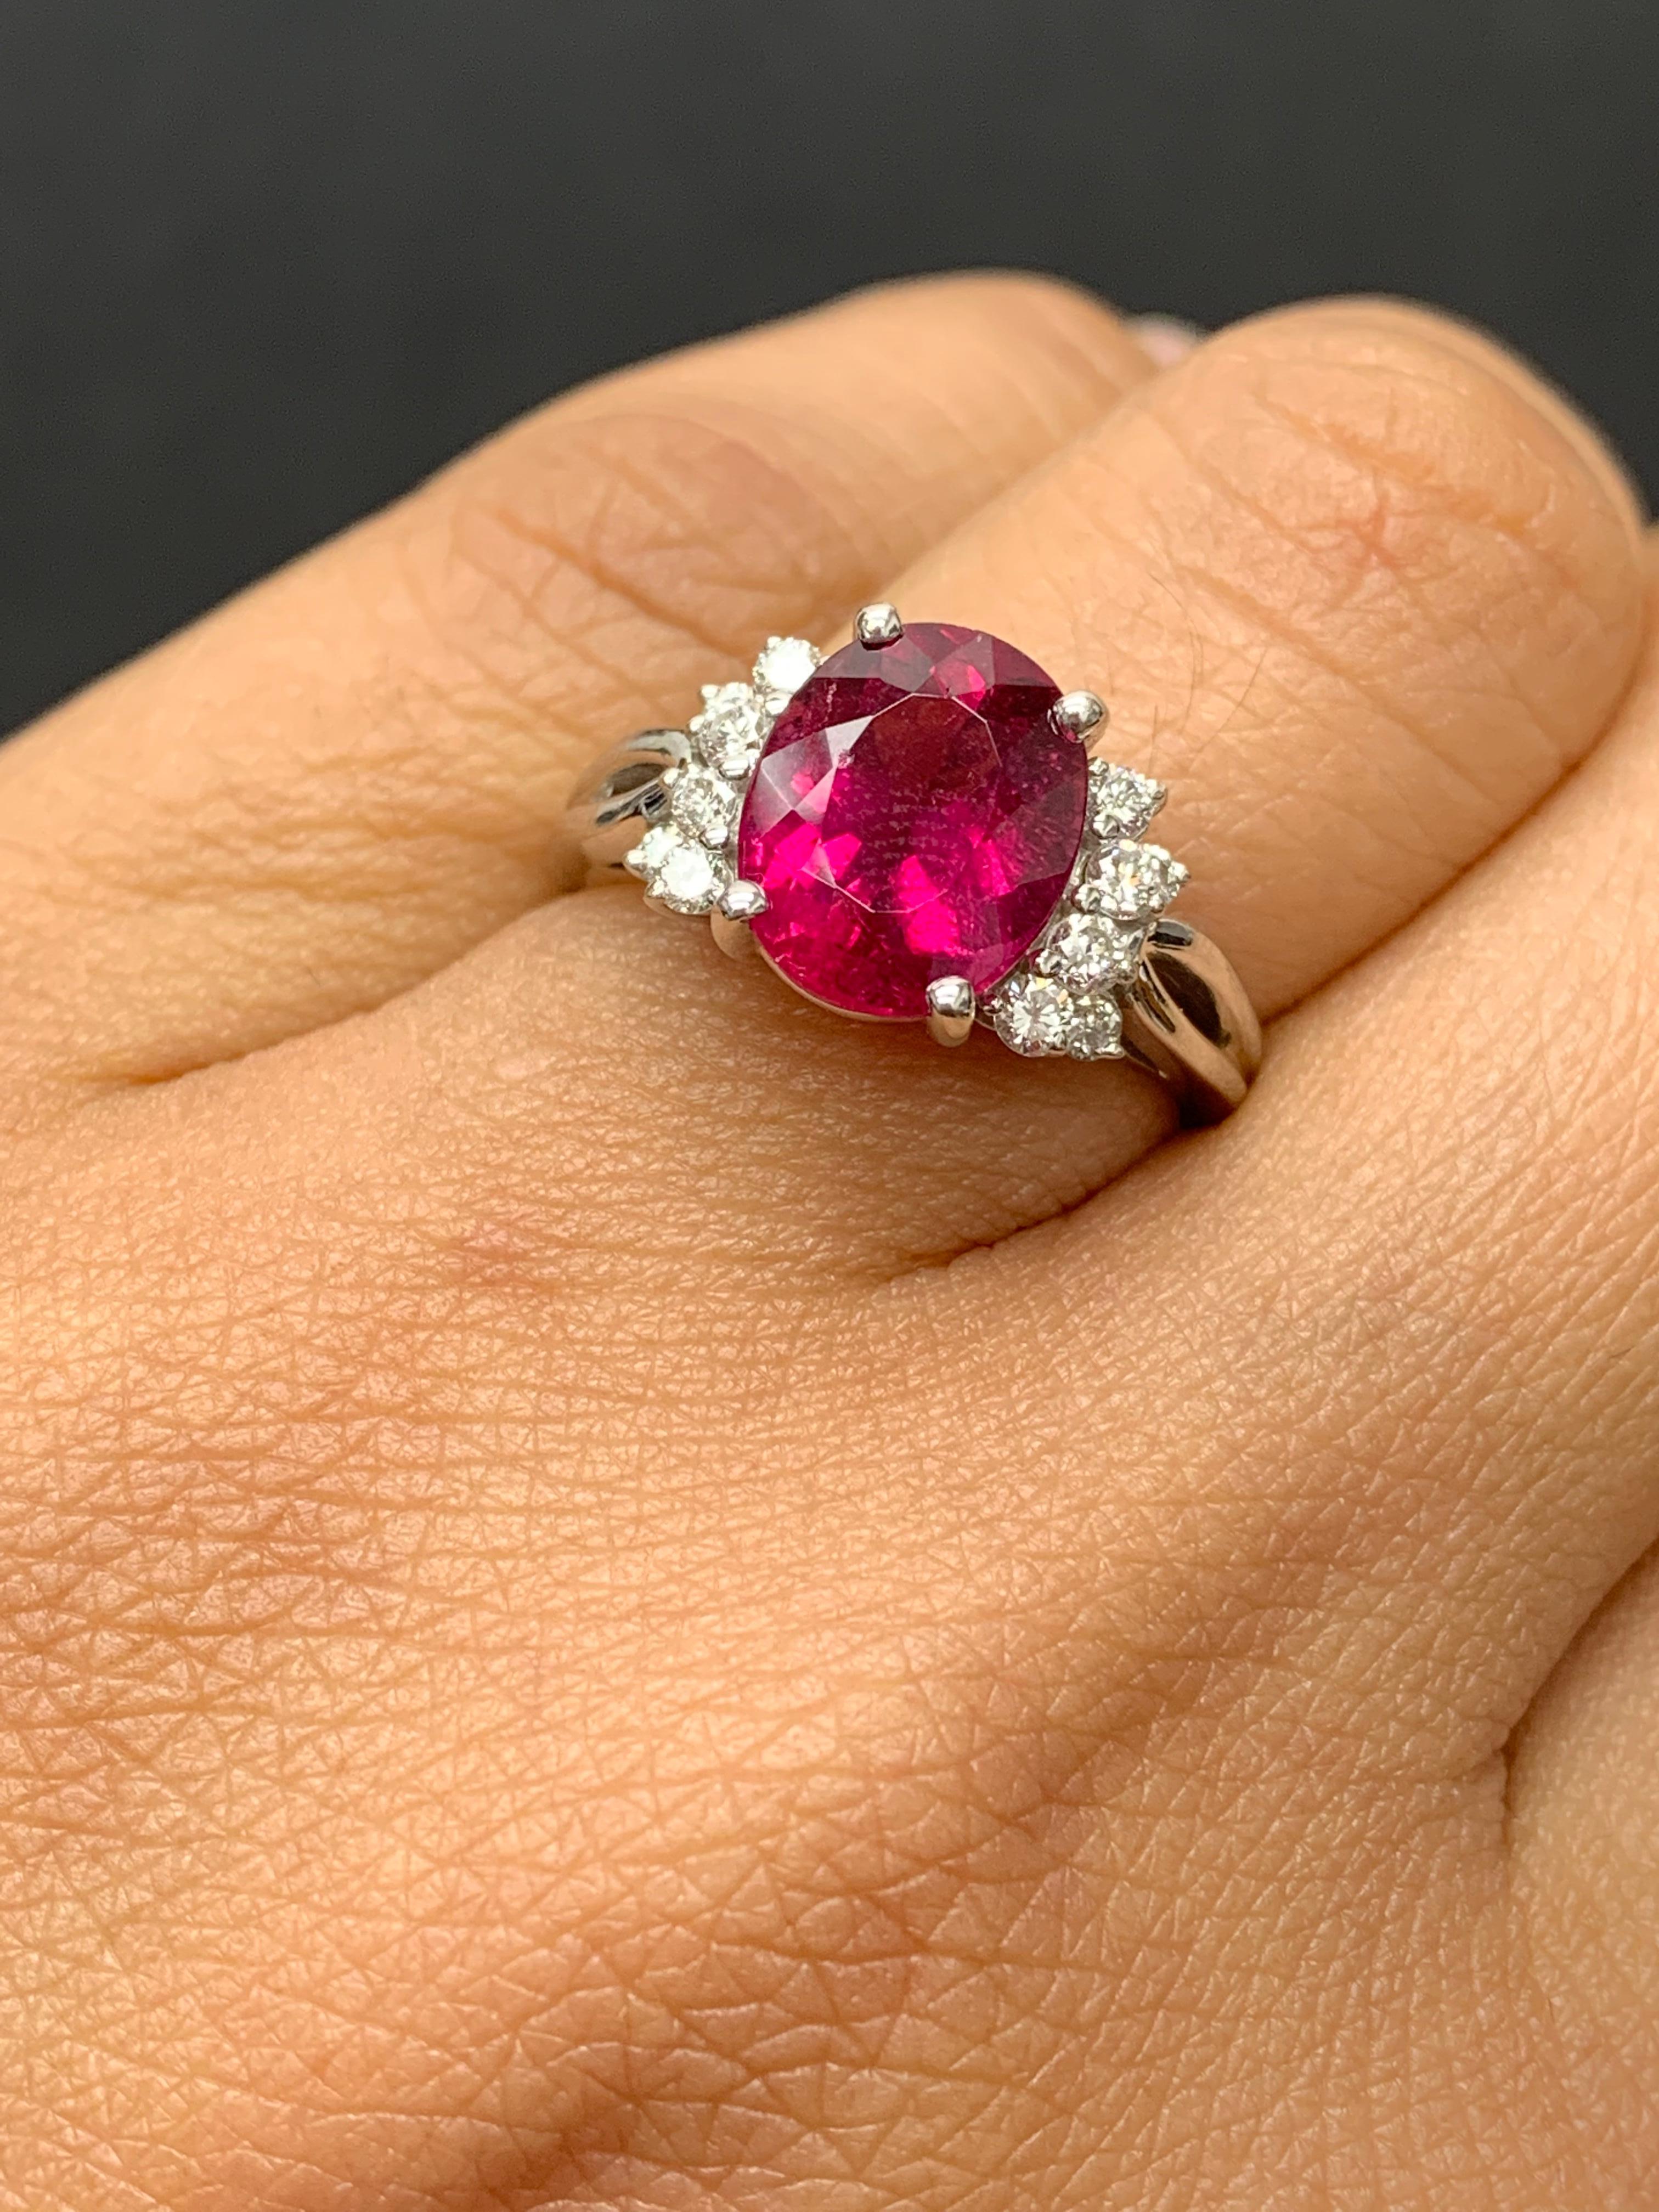 2.80 Carat Oval Cut Pink Tourmaline and Diamond Ring in 18K White Gold For Sale 1